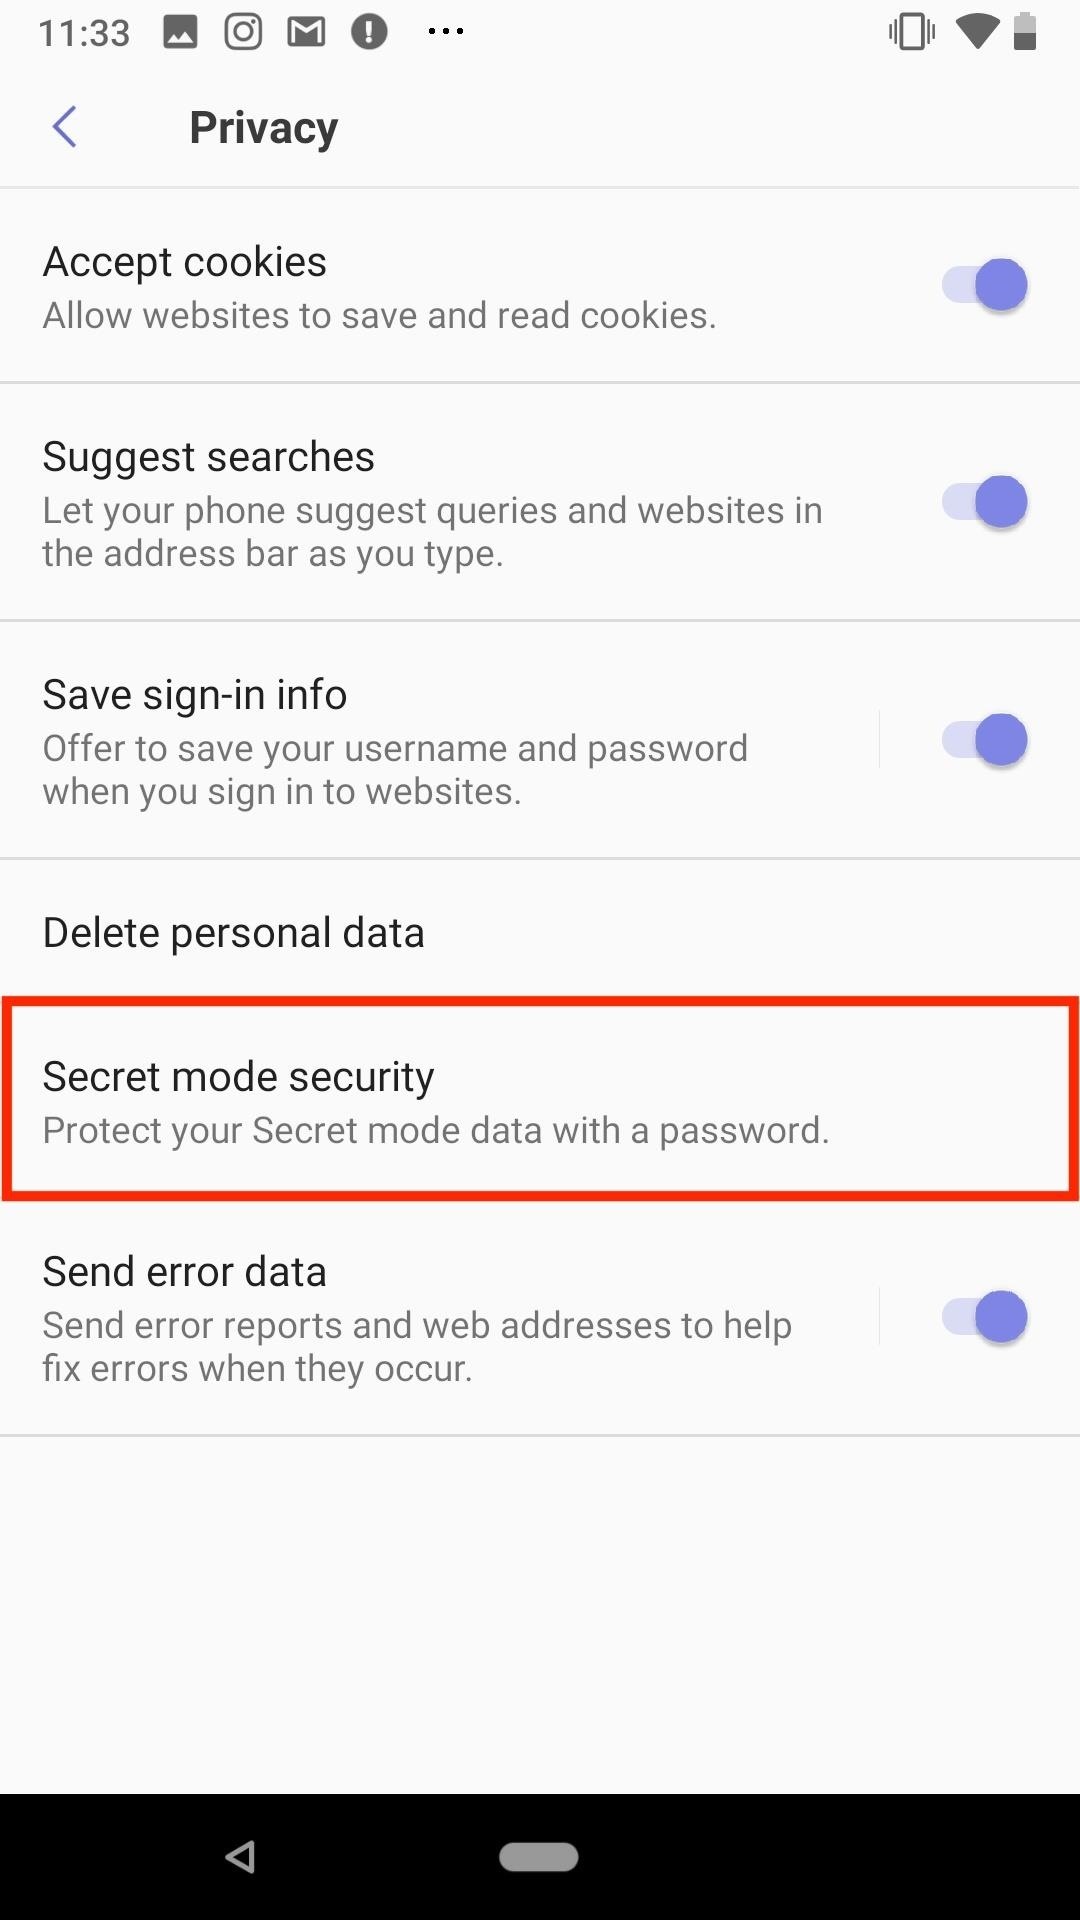 Samsung Internet 101: How to Password-Protect Your Private Browsing Sessions